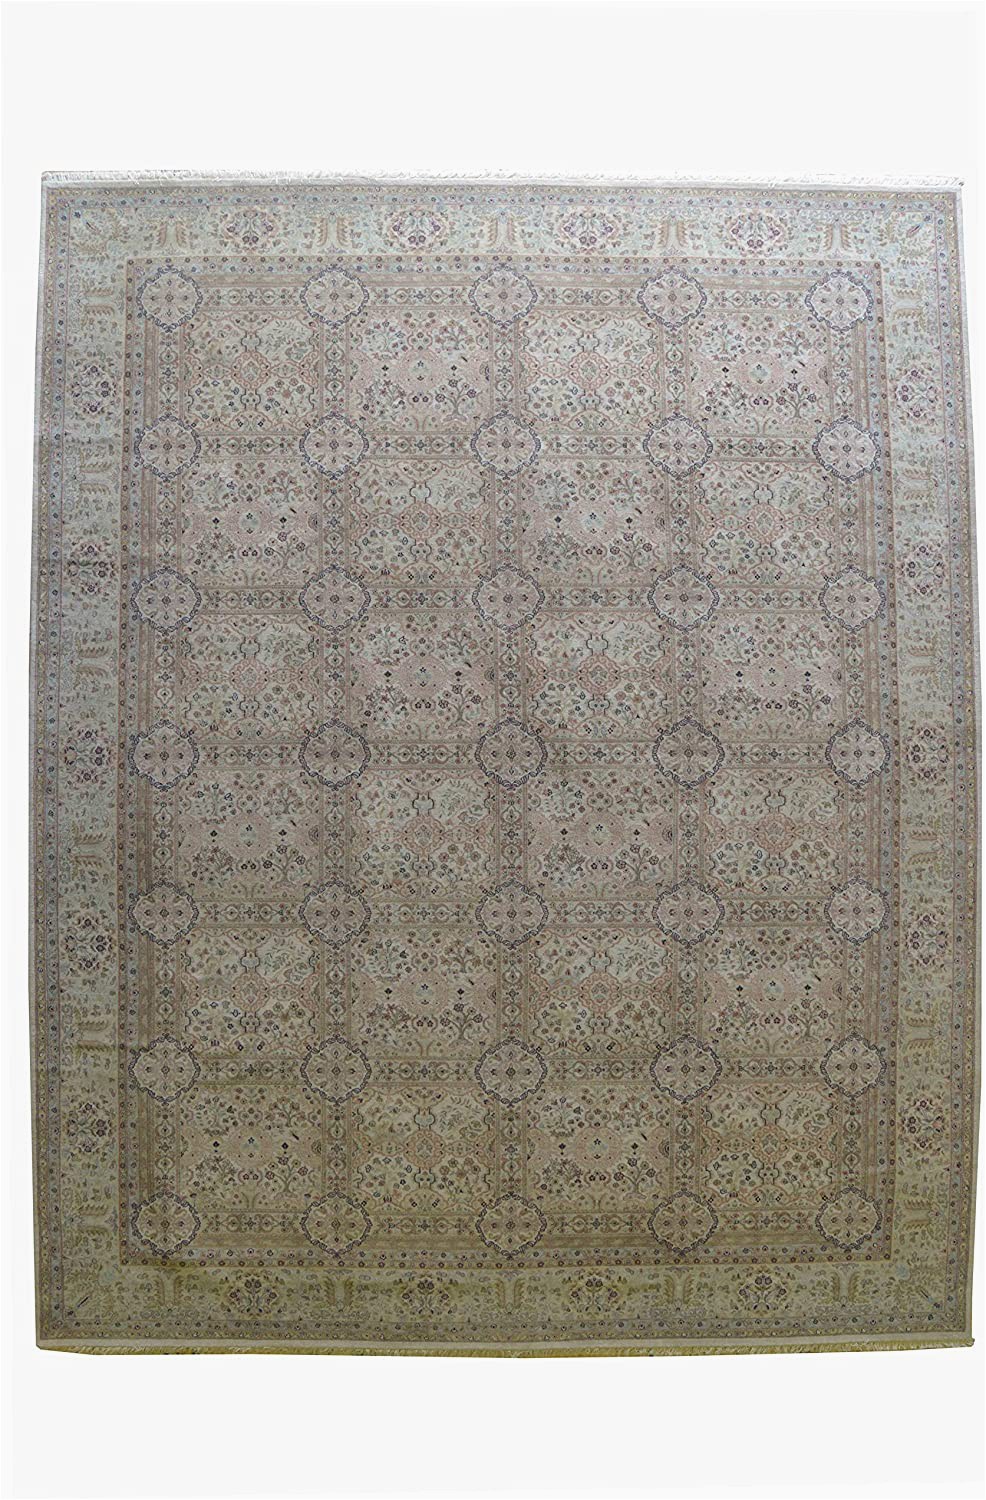 13 by 15 area Rugs Amazon Beige Color 13 X 13 Hand Knotted Nepali Wool Rug